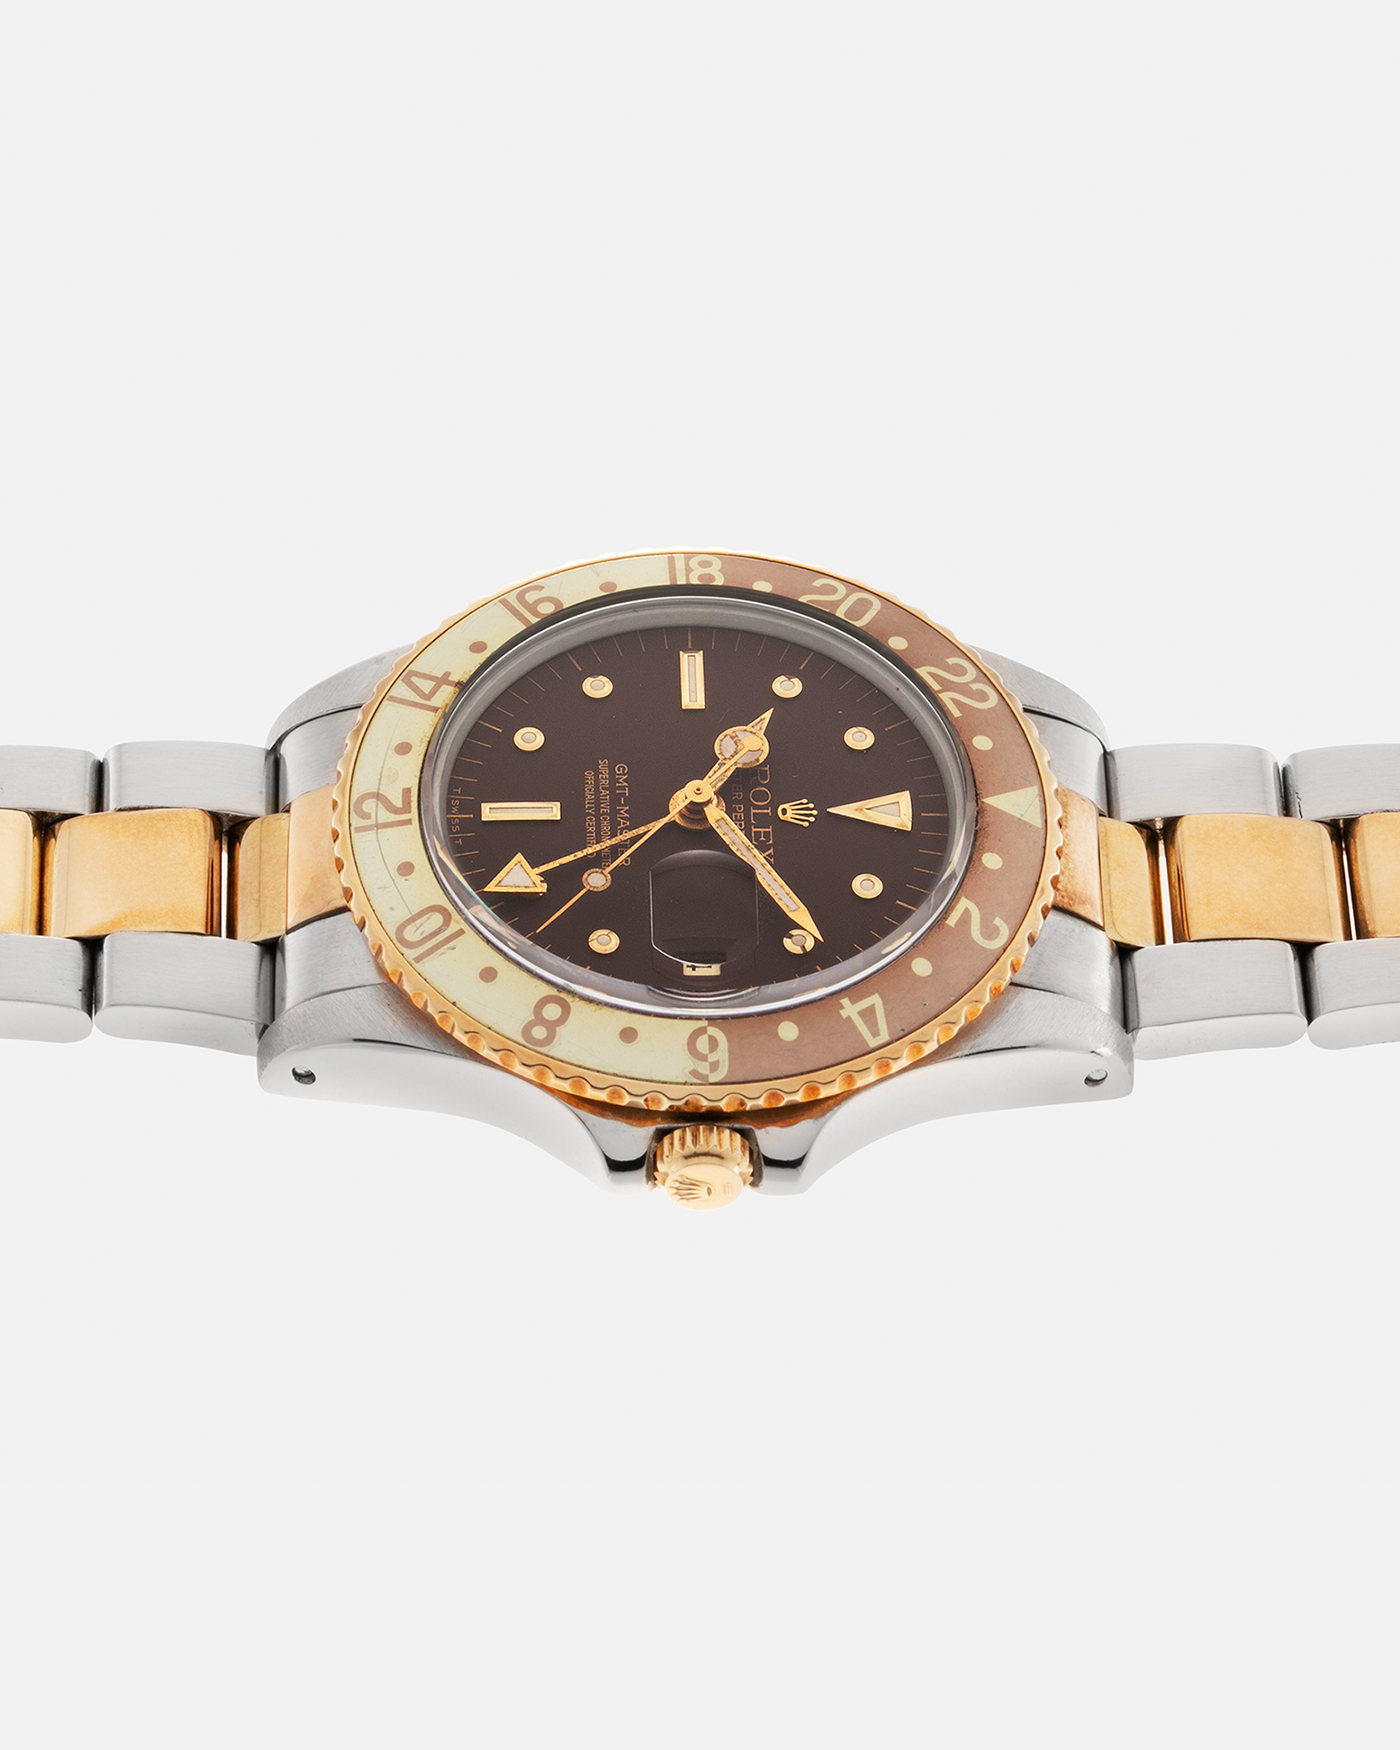 Brand: Rolex Year: 1975 Model: GMT-Master “Root Beer Nipple Dial” Reference Number: 1675 Serial Number: 399XXXX Material: Two-Tone Stainless Steel and Gold Case, Aluminum Bezel Insert Movement: Rolex Cal. 1575, Self-Winding Case Diameter: 39.5mm Lug Width: 20mm Bracelet: Rolex Two-Tone Stainless Steel and Gold ‘78363’ Folded Oyster Bracelet with Signed ‘VC’ Stainless Steel Clasp and ‘480’ Curved End Links